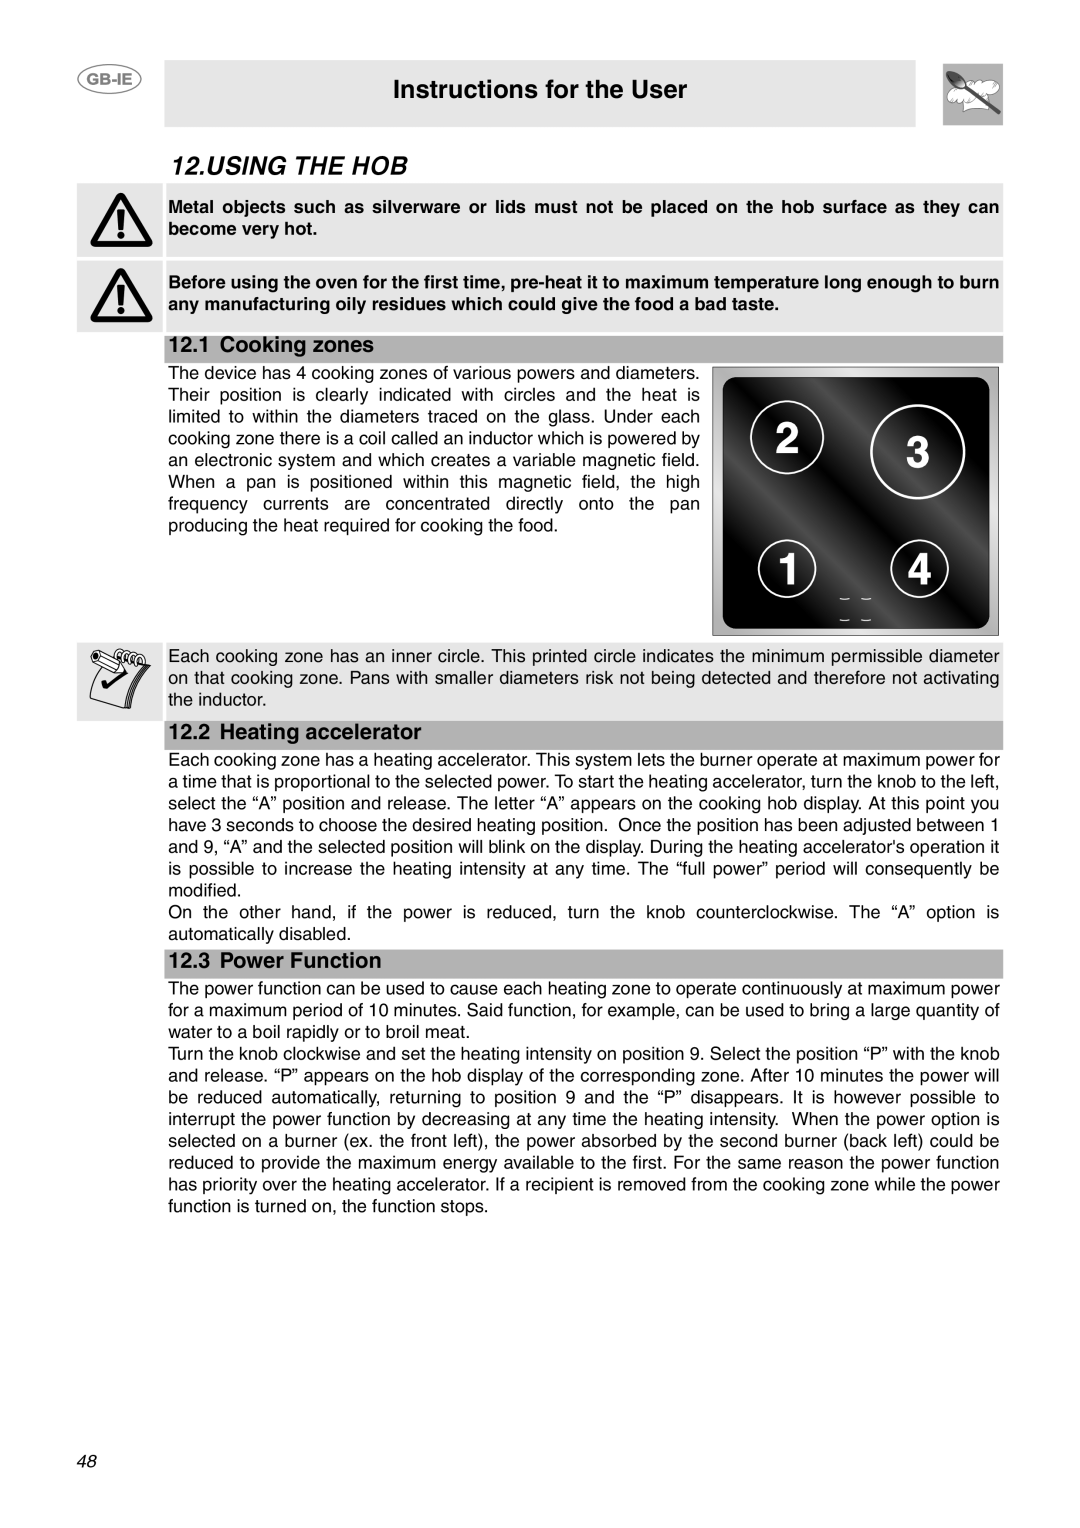 Smeg CE6IMX manual Using The Hob, Cooking zones, Heating accelerator, Power Function, Instructions for the User 